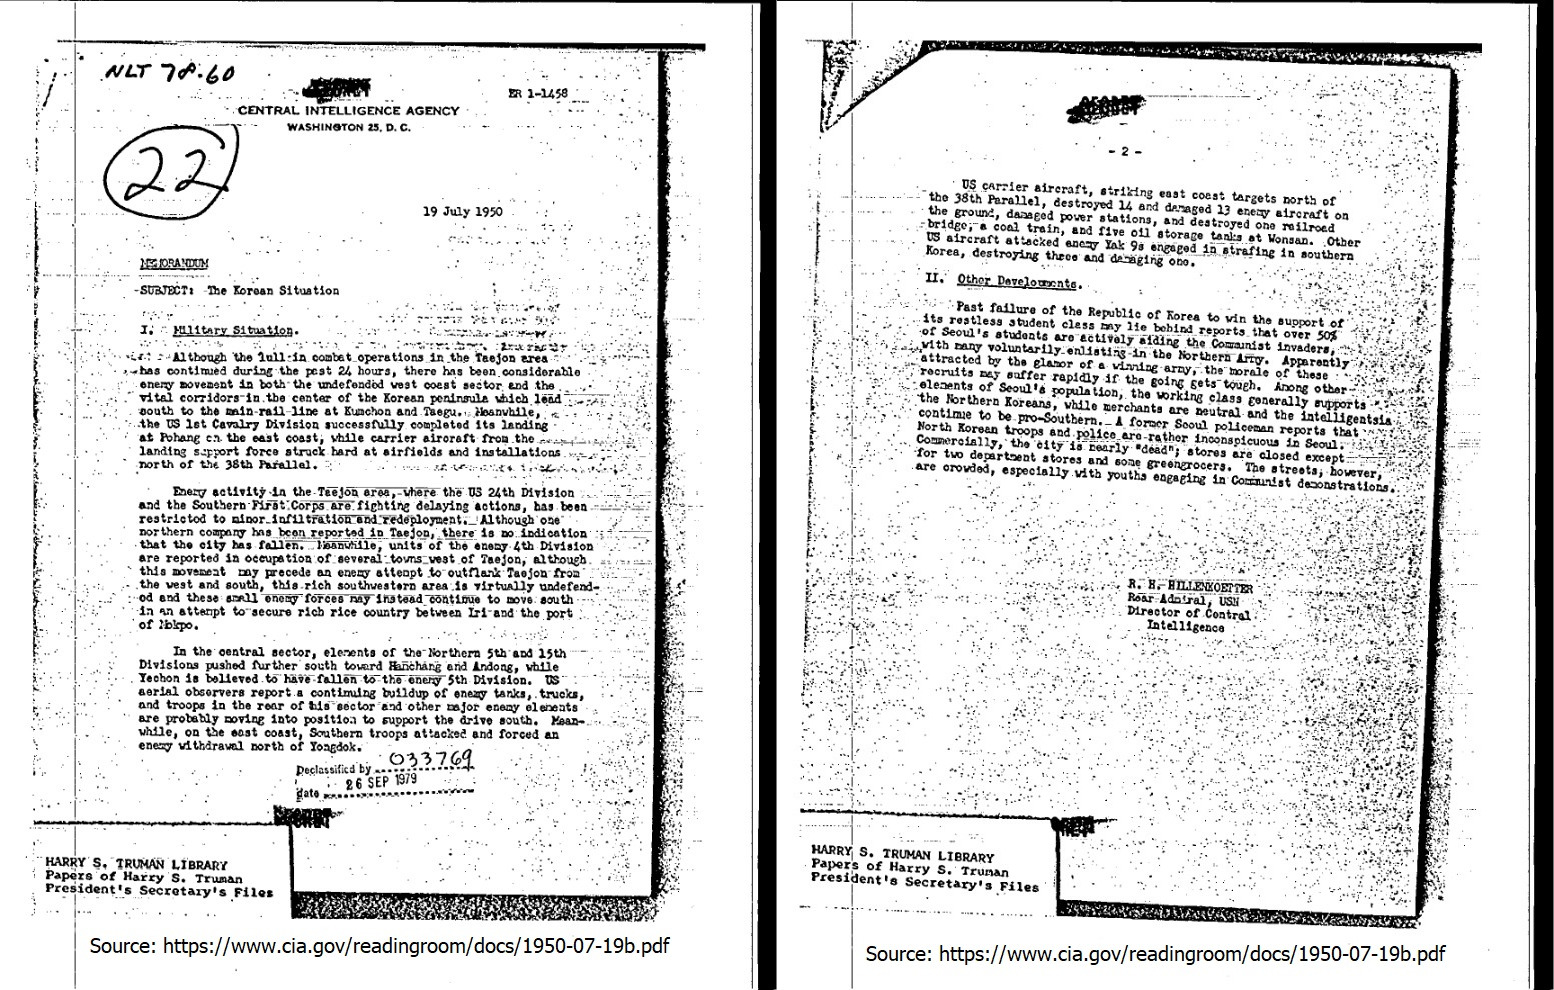 CIA document pages 1 and 2.jpg